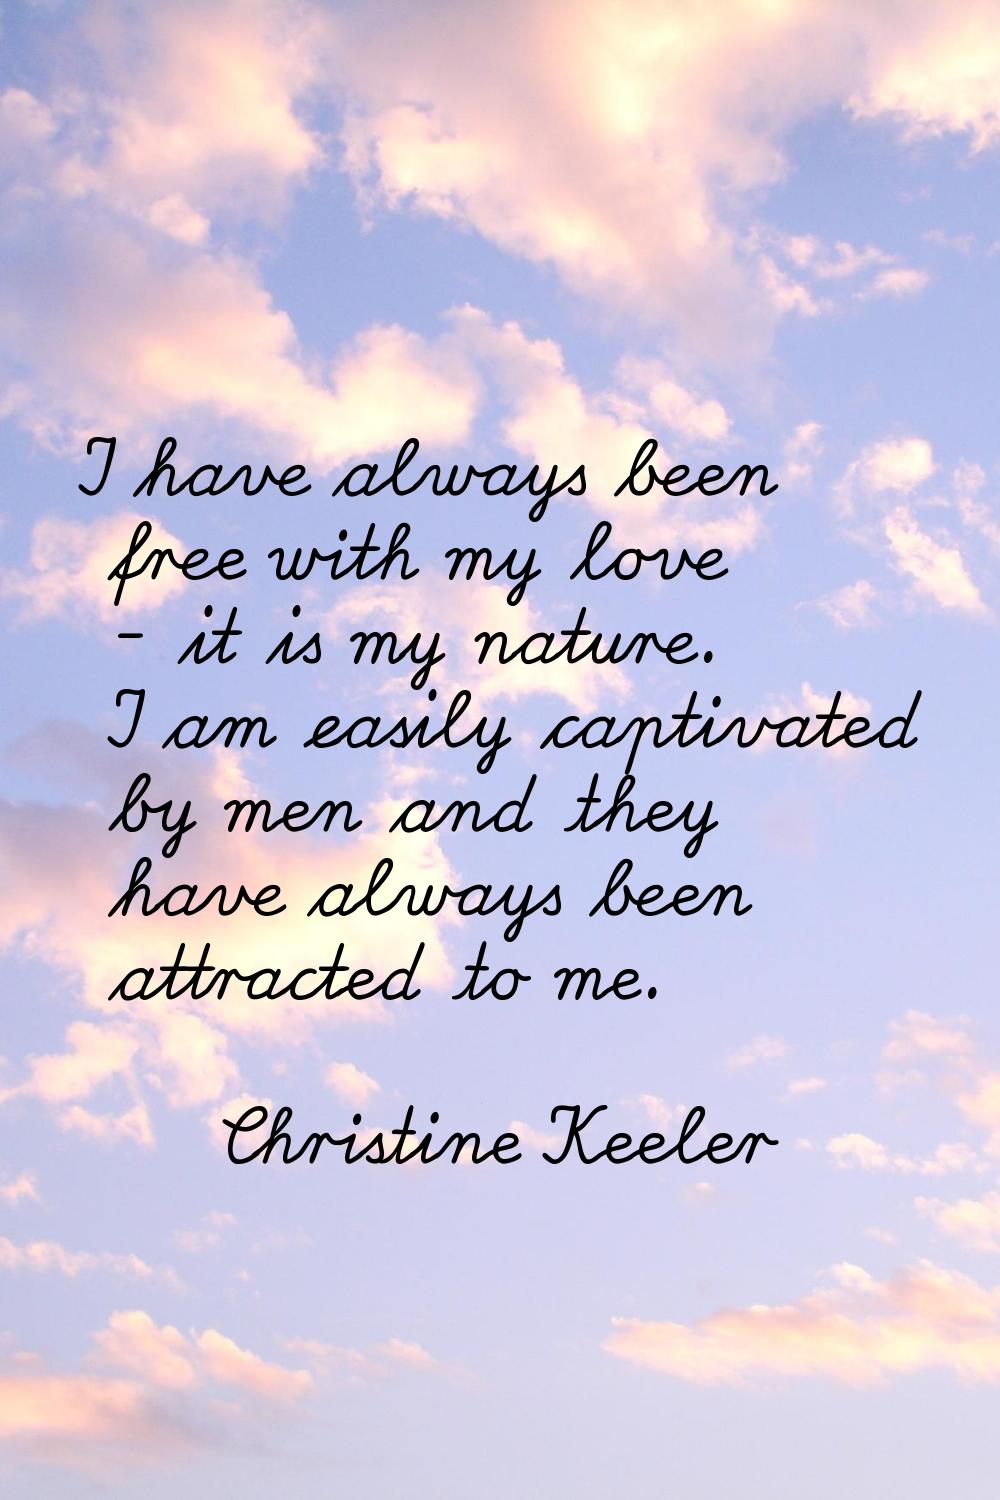 I have always been free with my love - it is my nature. I am easily captivated by men and they have